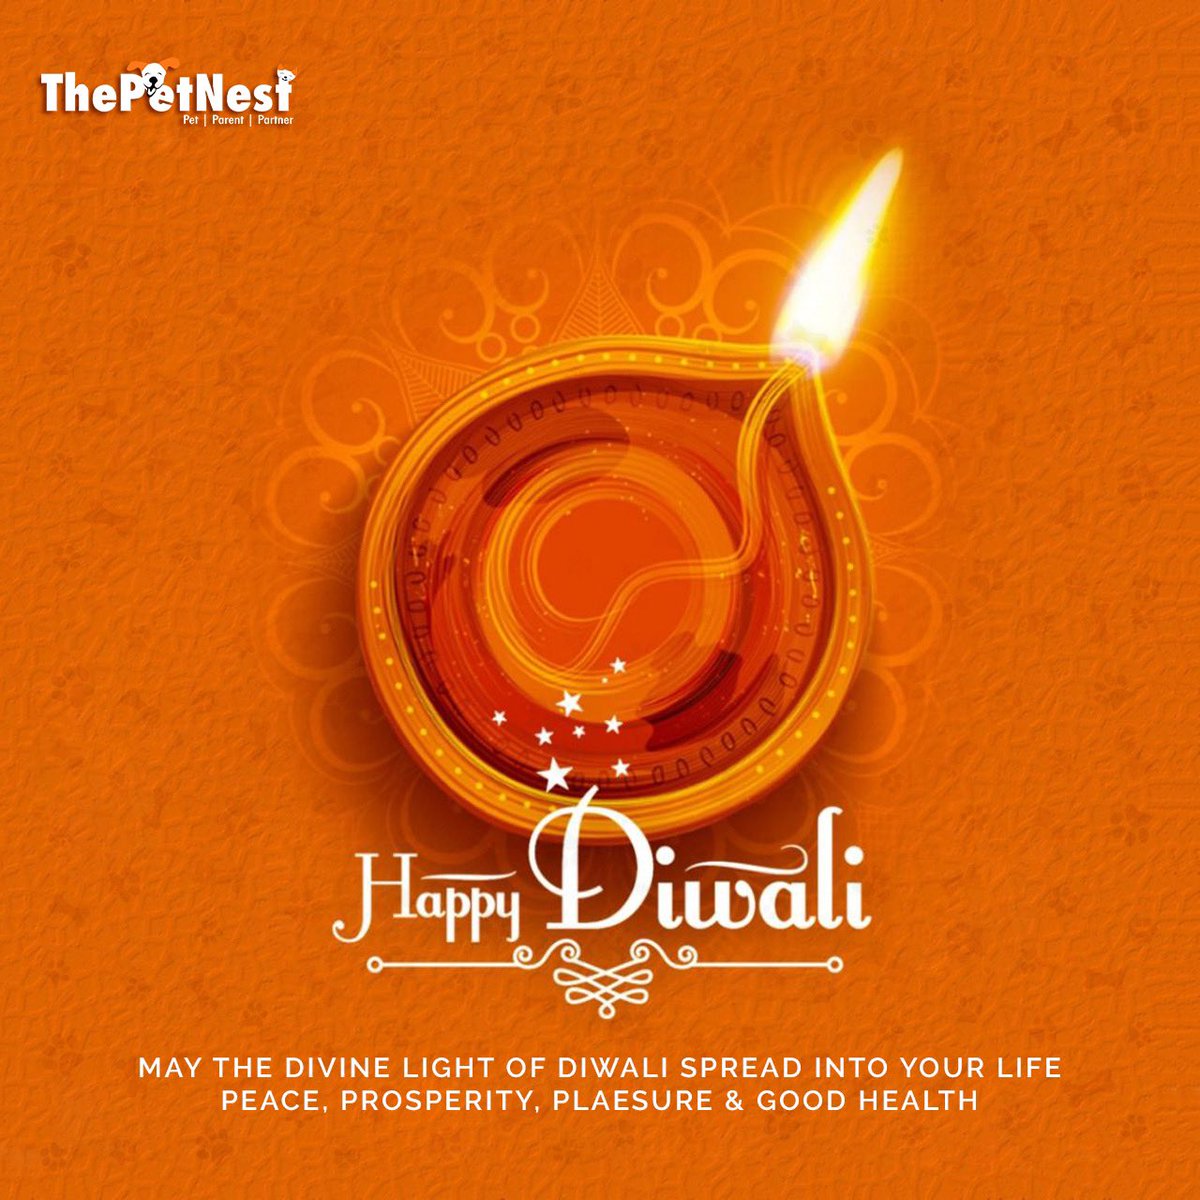 ThePetNest Family wishes everyone a very Happy Diwali!🪔🪔
May this festival of lights bring lots of love and happiness in your life!✨✨
.
.
.
#thepetnest #wagwiththepetnest #pets #diwali #diwali2022 #diwalivibes #diwalidecor #petsofinstagram #petslife #petscorner